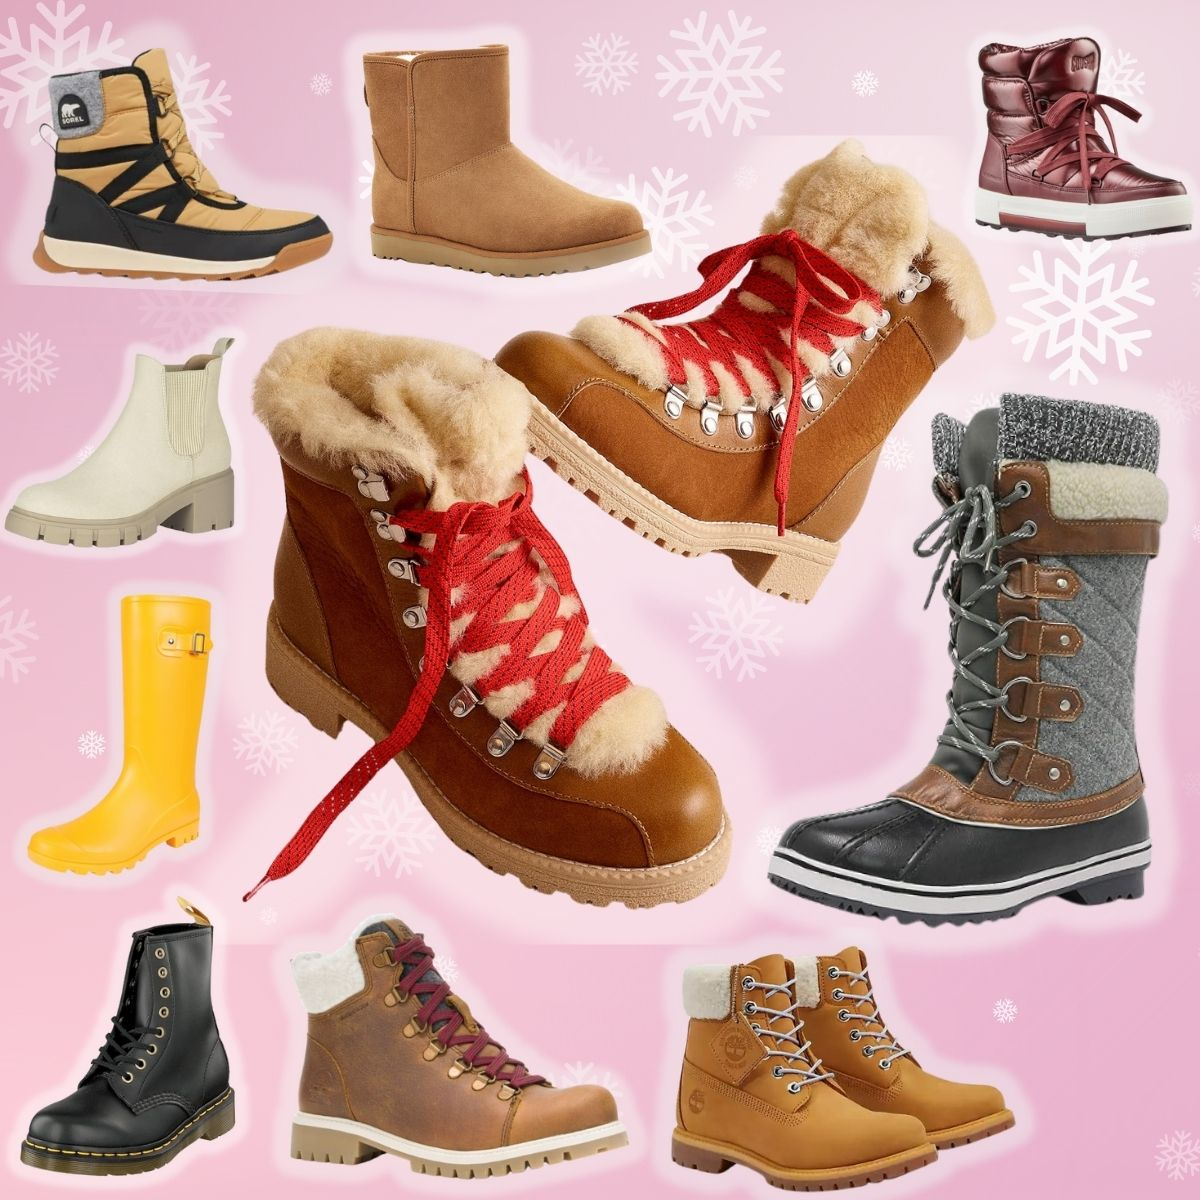 These Deals on Winter Boots Were Made For Walking & So Much More